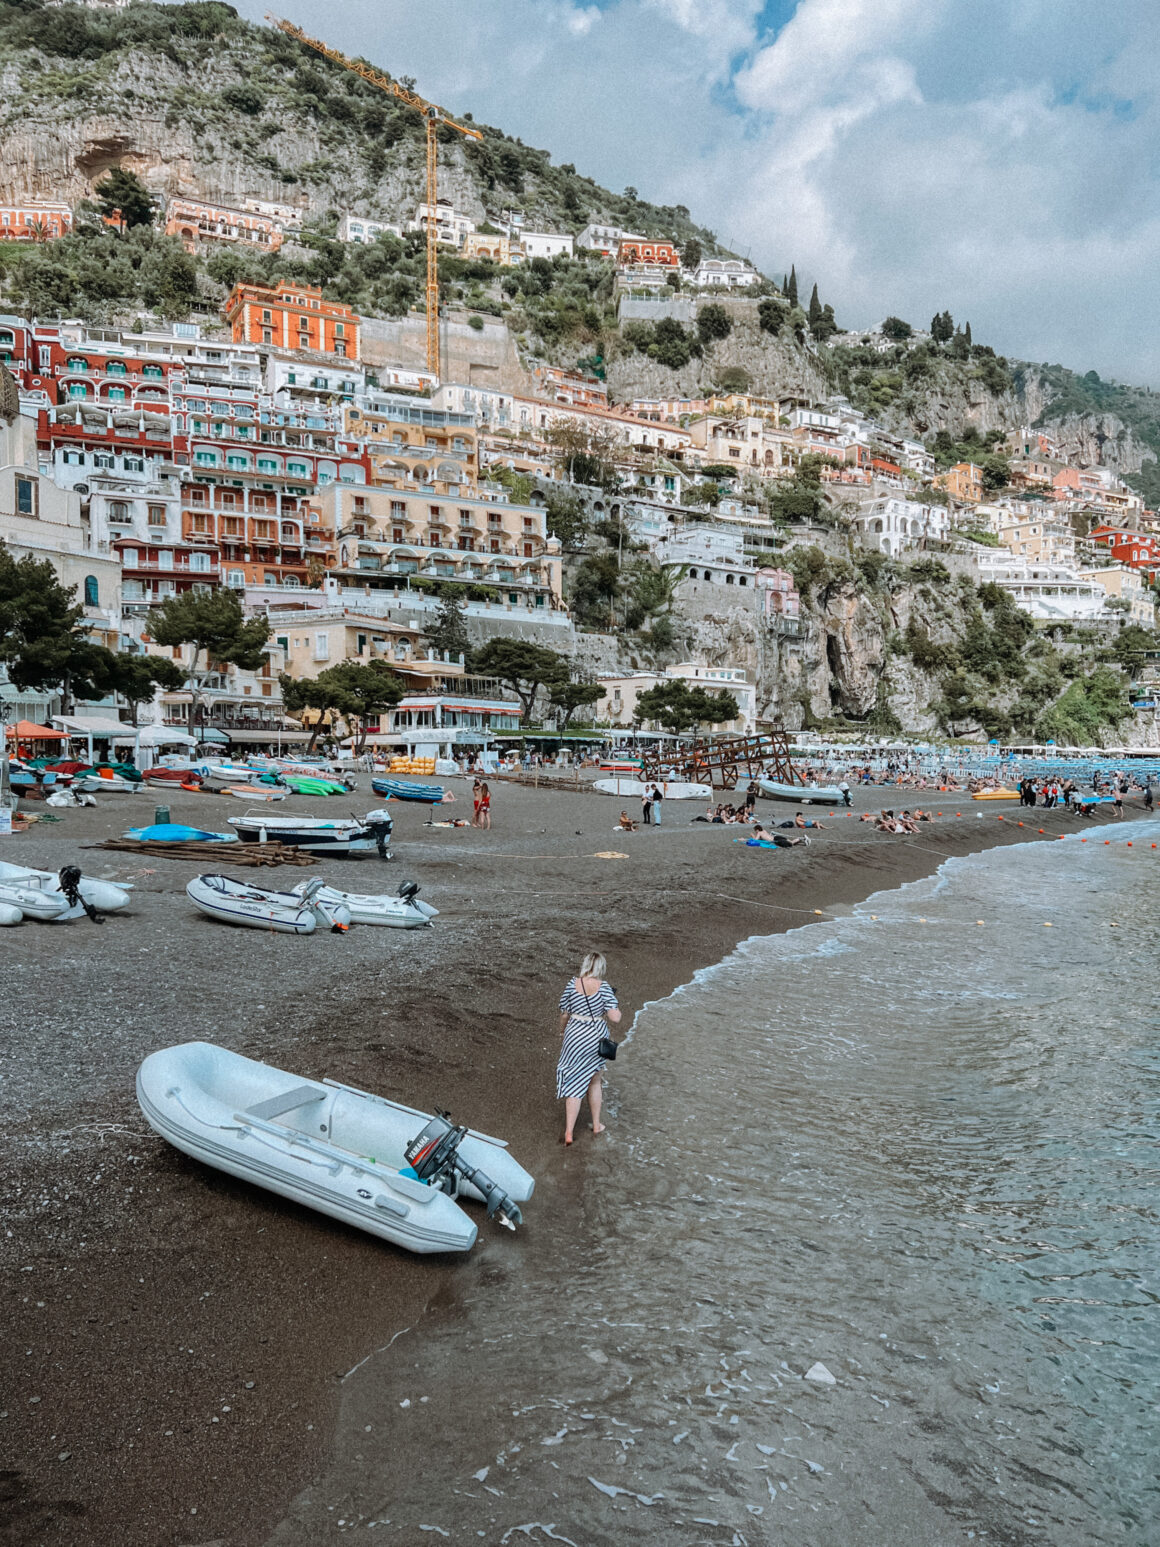 Positano’s Popular Beach, Spiaggia Grande, one of the best things to do in Positano